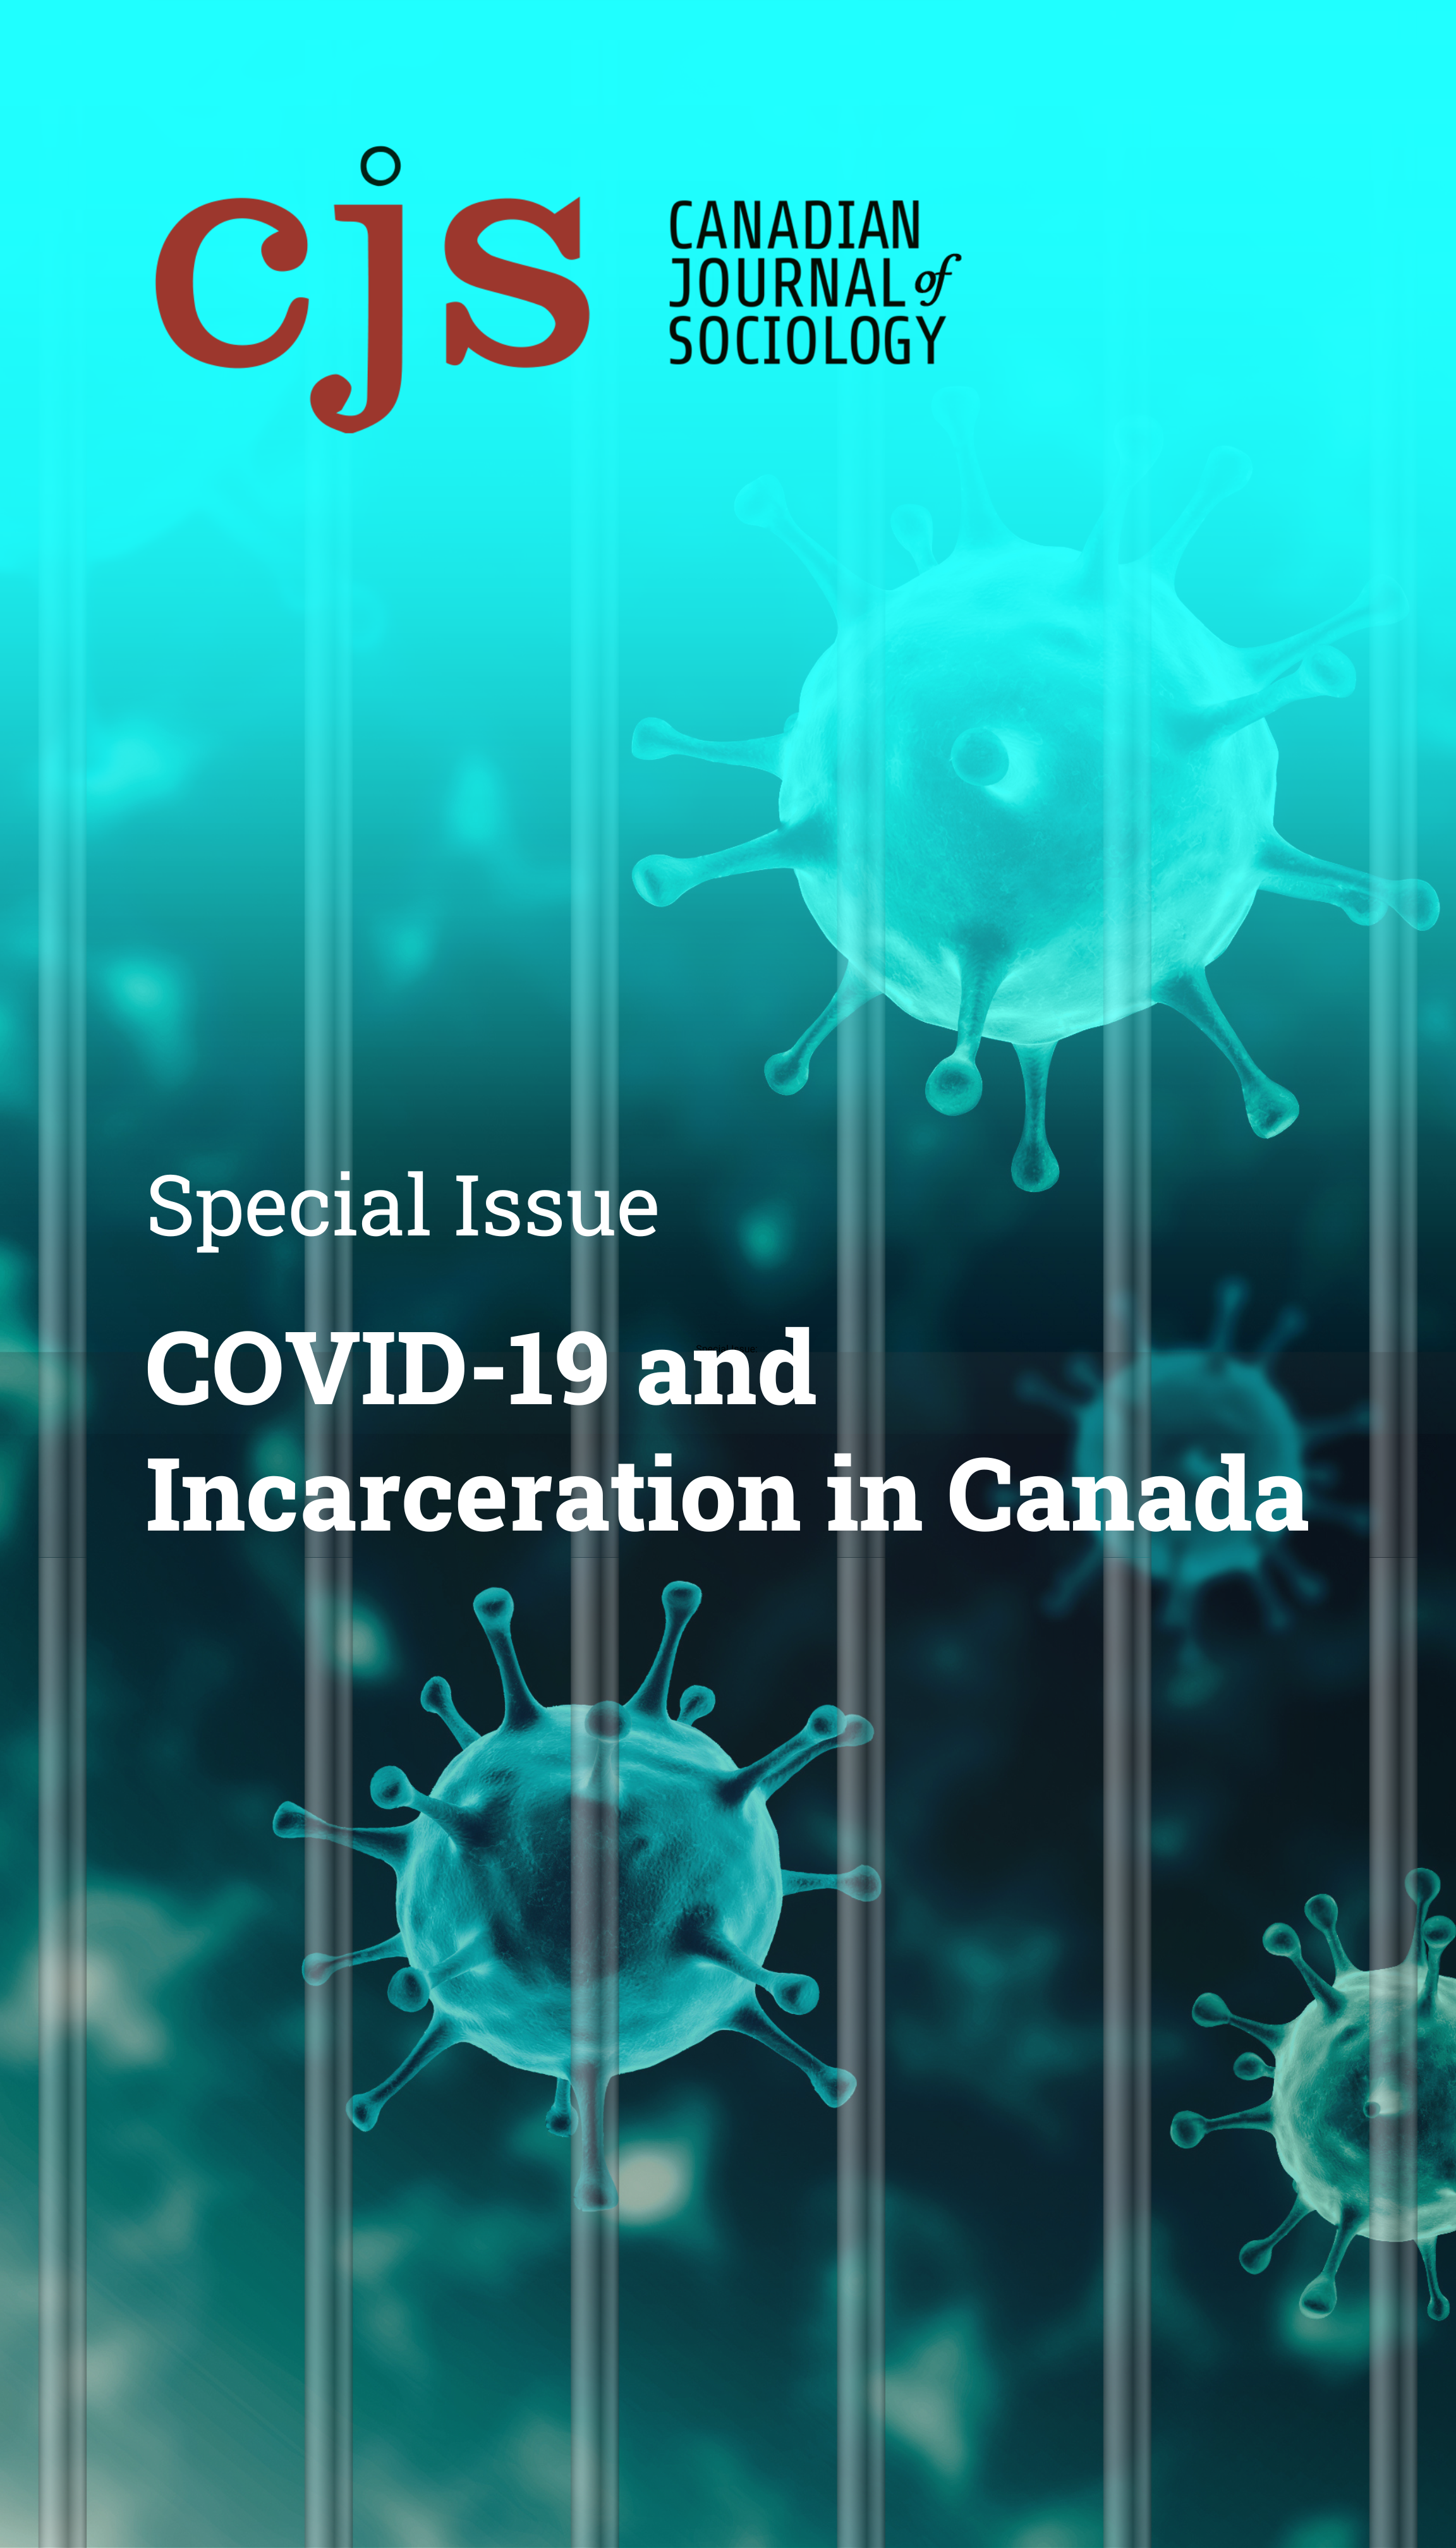 A representation of the COVID virus in green, overlaid by prison bars. Title is CJS Canadian Journal of Sociology and Special Issue, COVID-19 and Incarceration in Canada